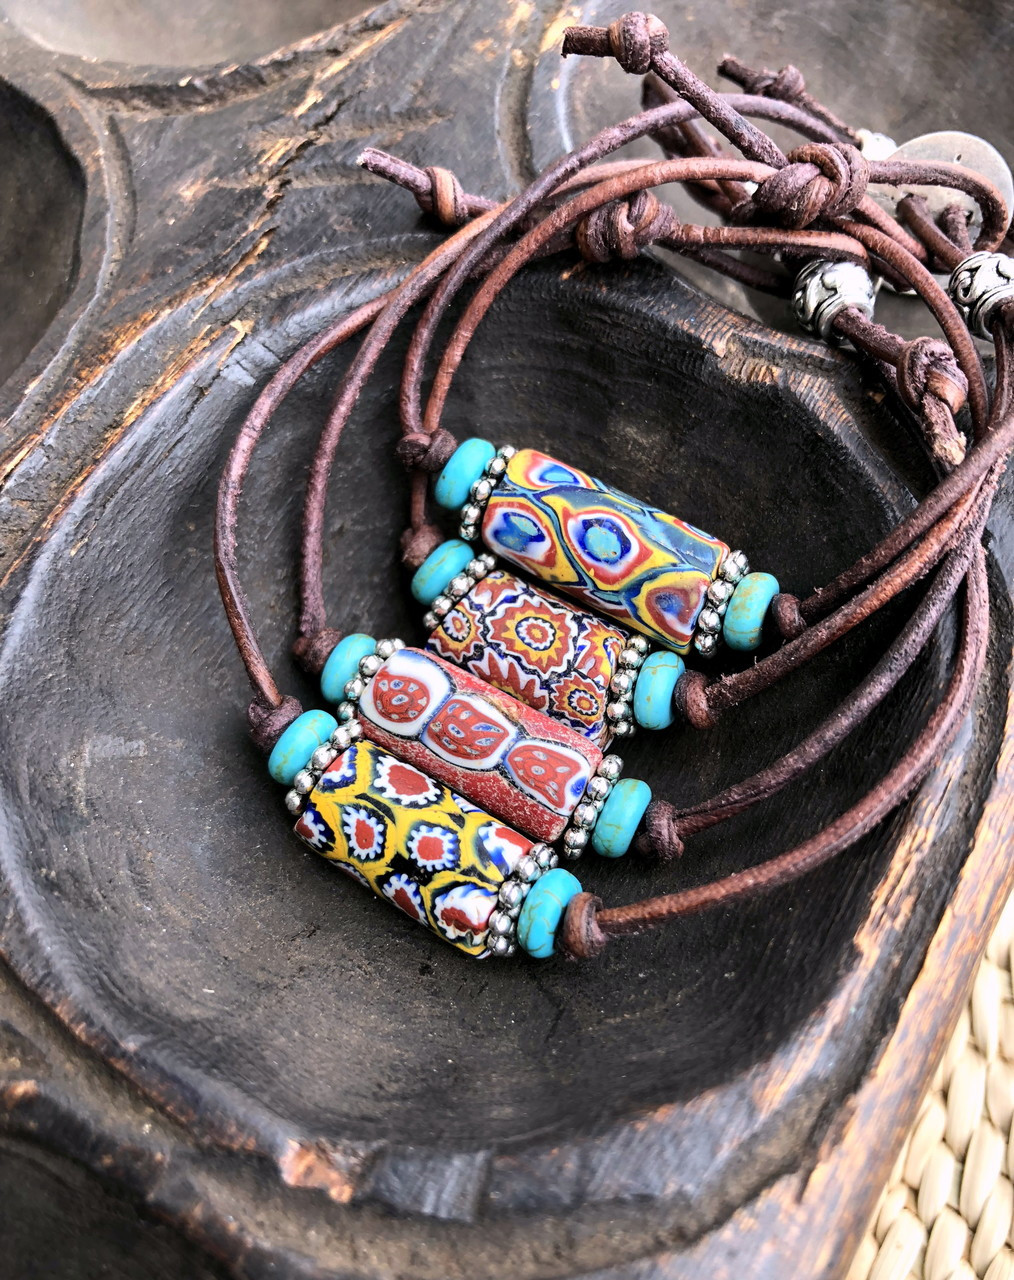 Trésors de St Barth - African trade beads leather bracelet from St Barth !